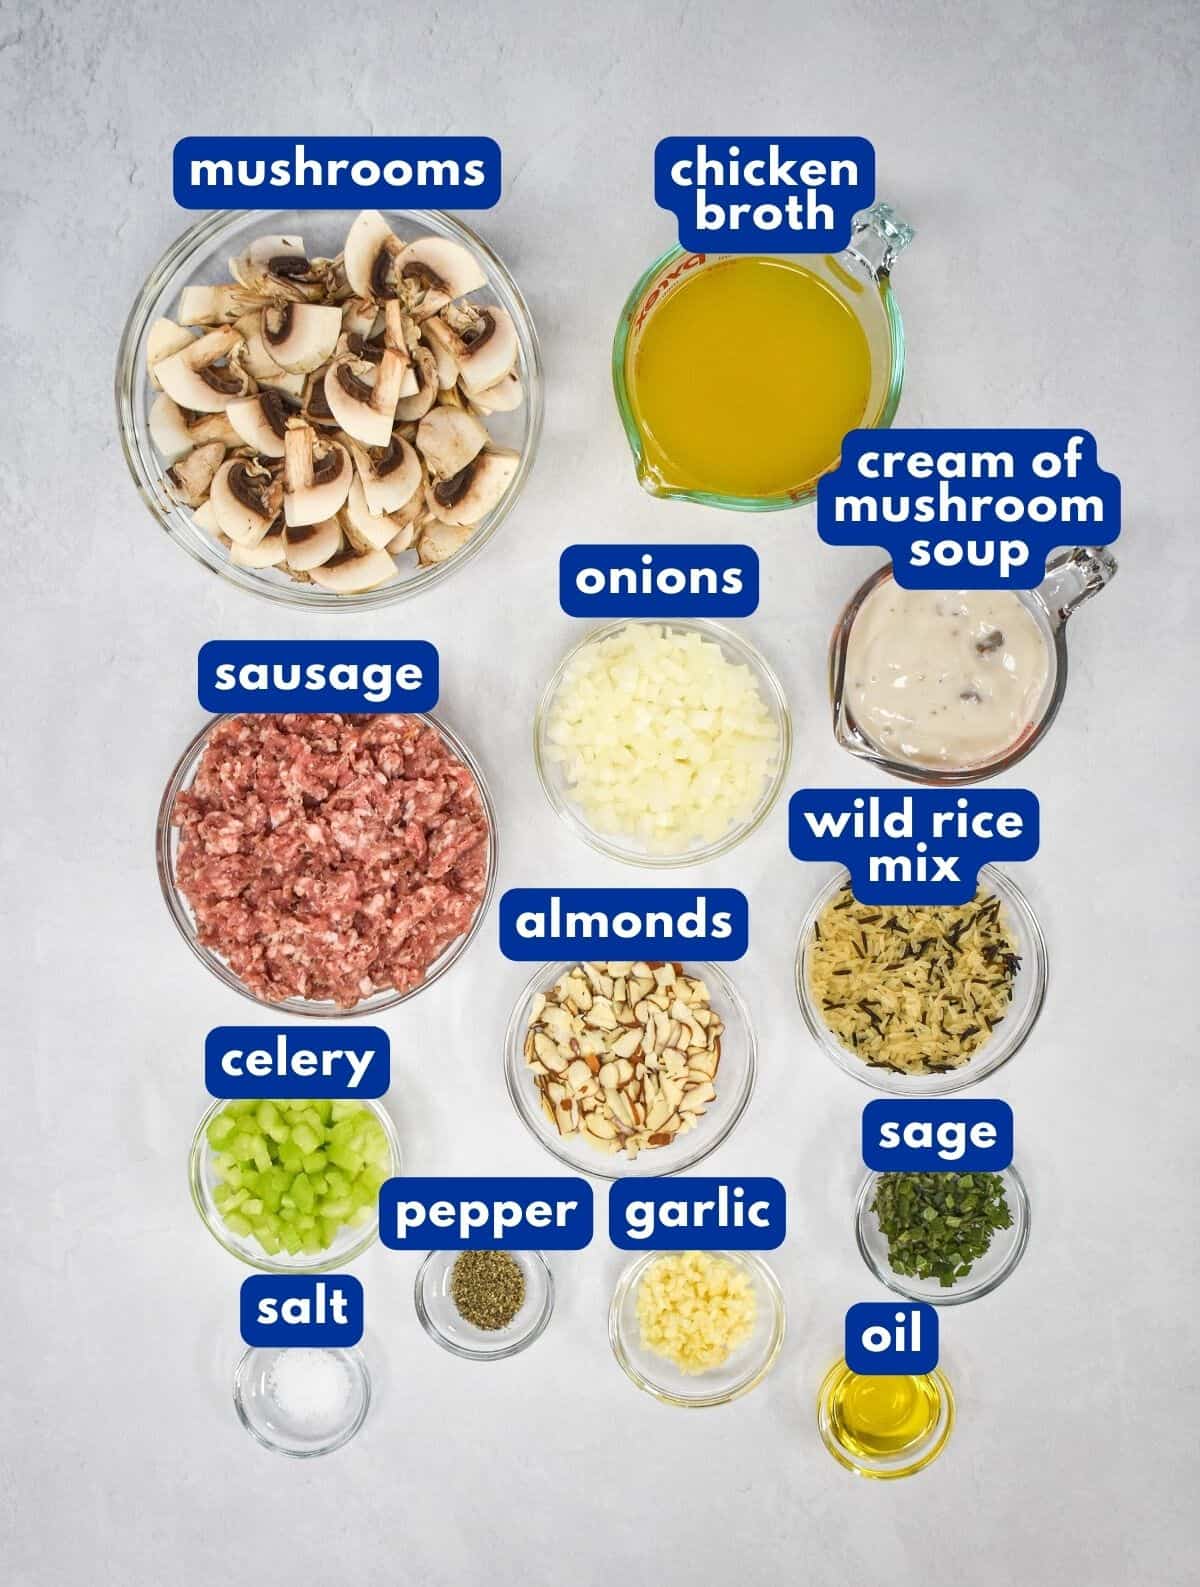 The ingredients for the sausage rice dish prepped and arranged in glass bowls on a white table with each ingredient labeled with blue and white letters.